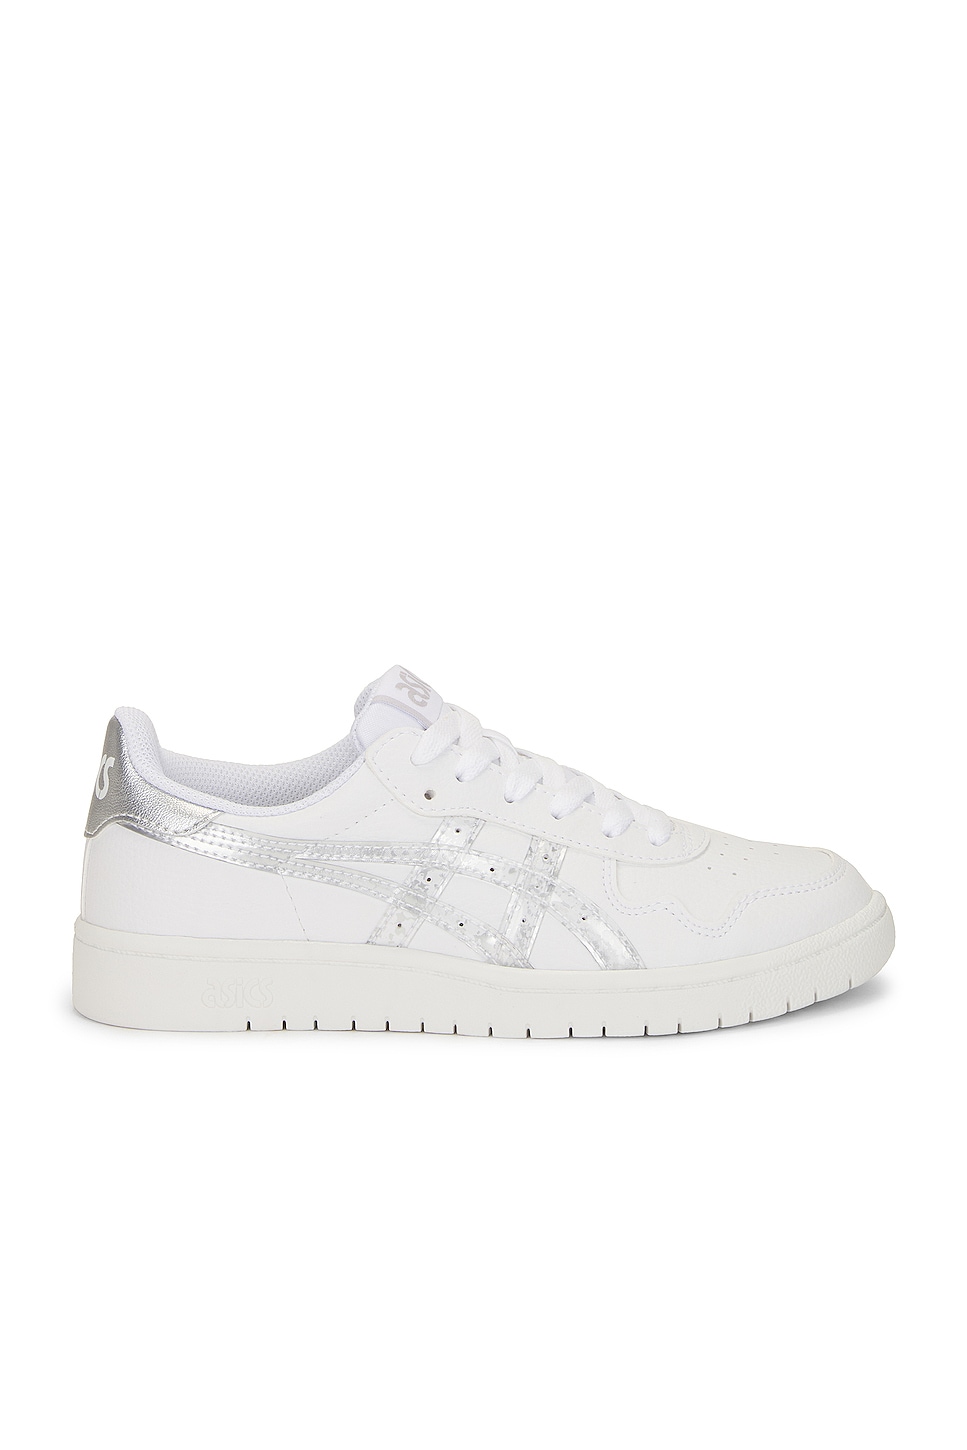 Image 1 of Asics Japan S in White & Pure Silver